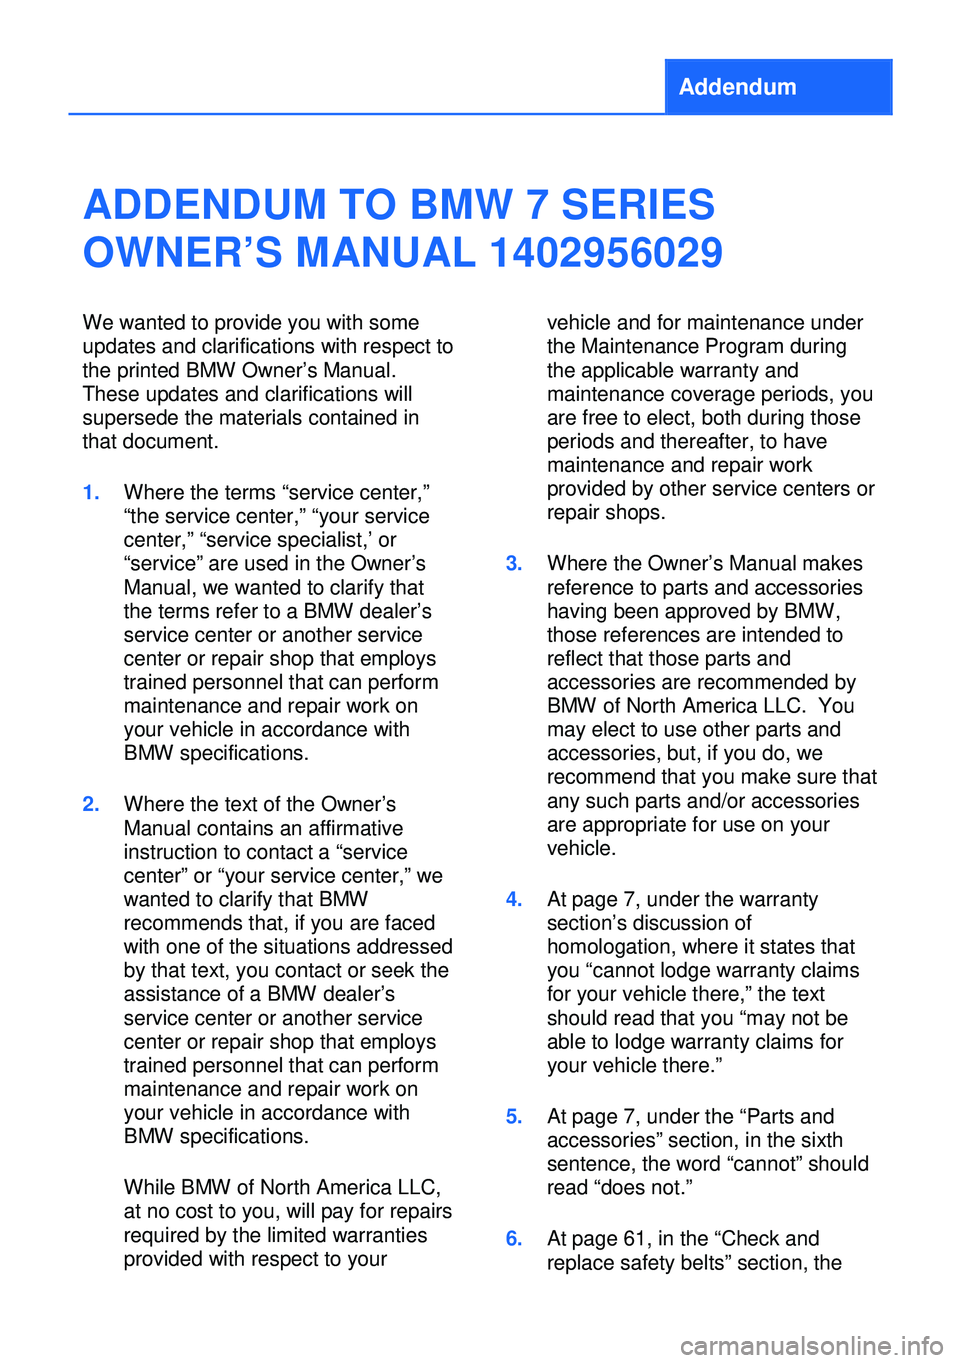 BMW 750I SEDAN 2014  Owners Manual Addendum
ADDENDUM TO BMW 7 SERIES
OWNER’S MANUAL 1402956029
We wanted to provide you with some
updates and clarifications with respect to
the printed BMW Owner’s Manual.
These updates and clarific